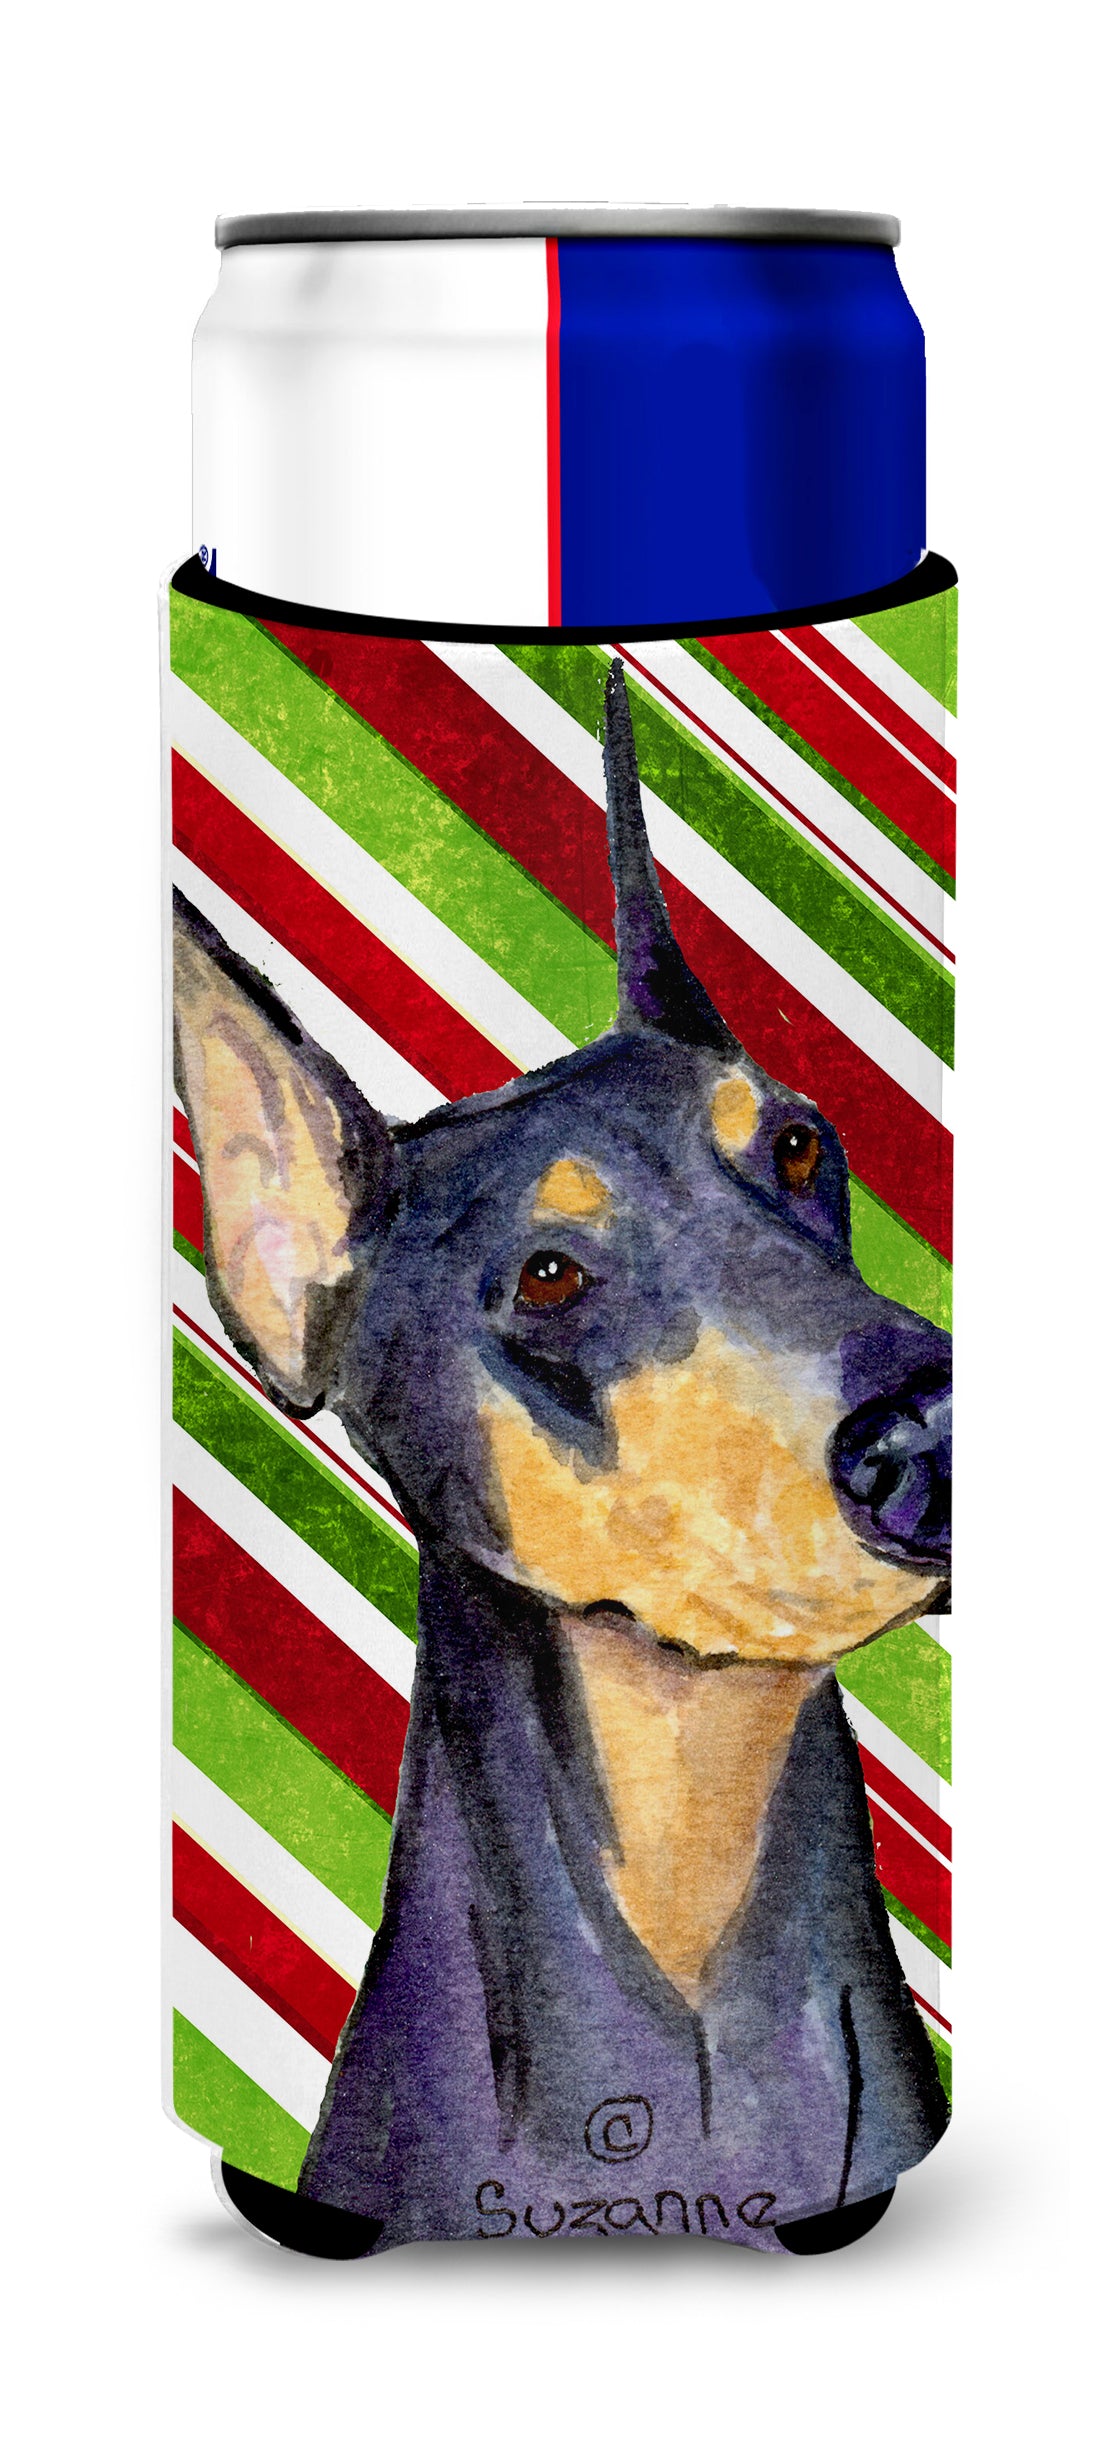 Doberman Candy Cane Holiday Christmas Ultra Beverage Insulators for slim cans SS4564MUK.